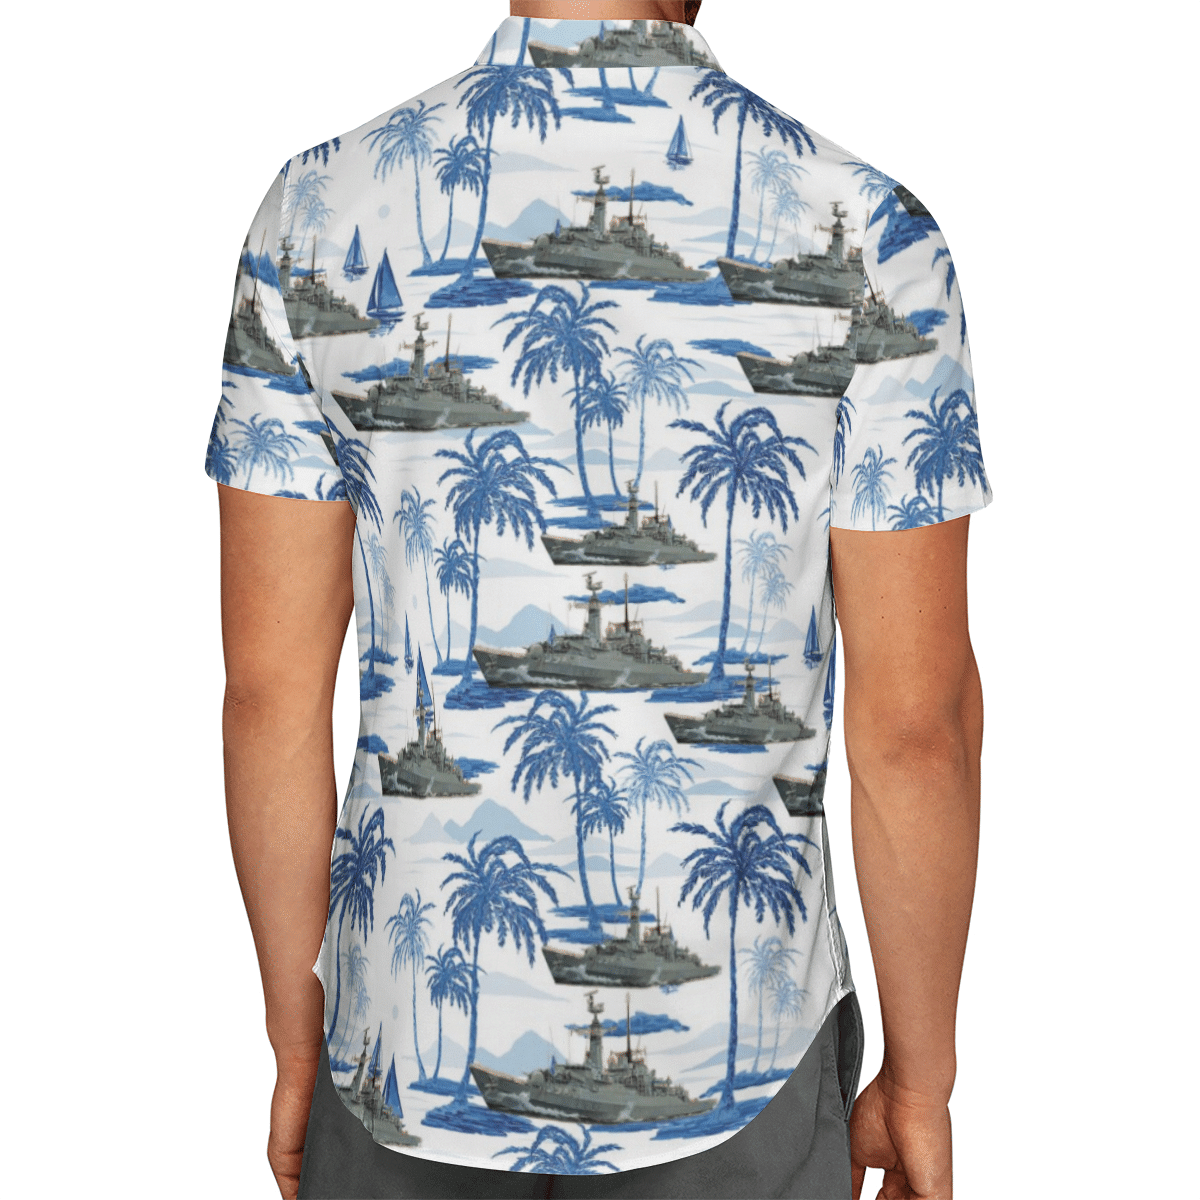 Going to the beach with a quality shirt 144